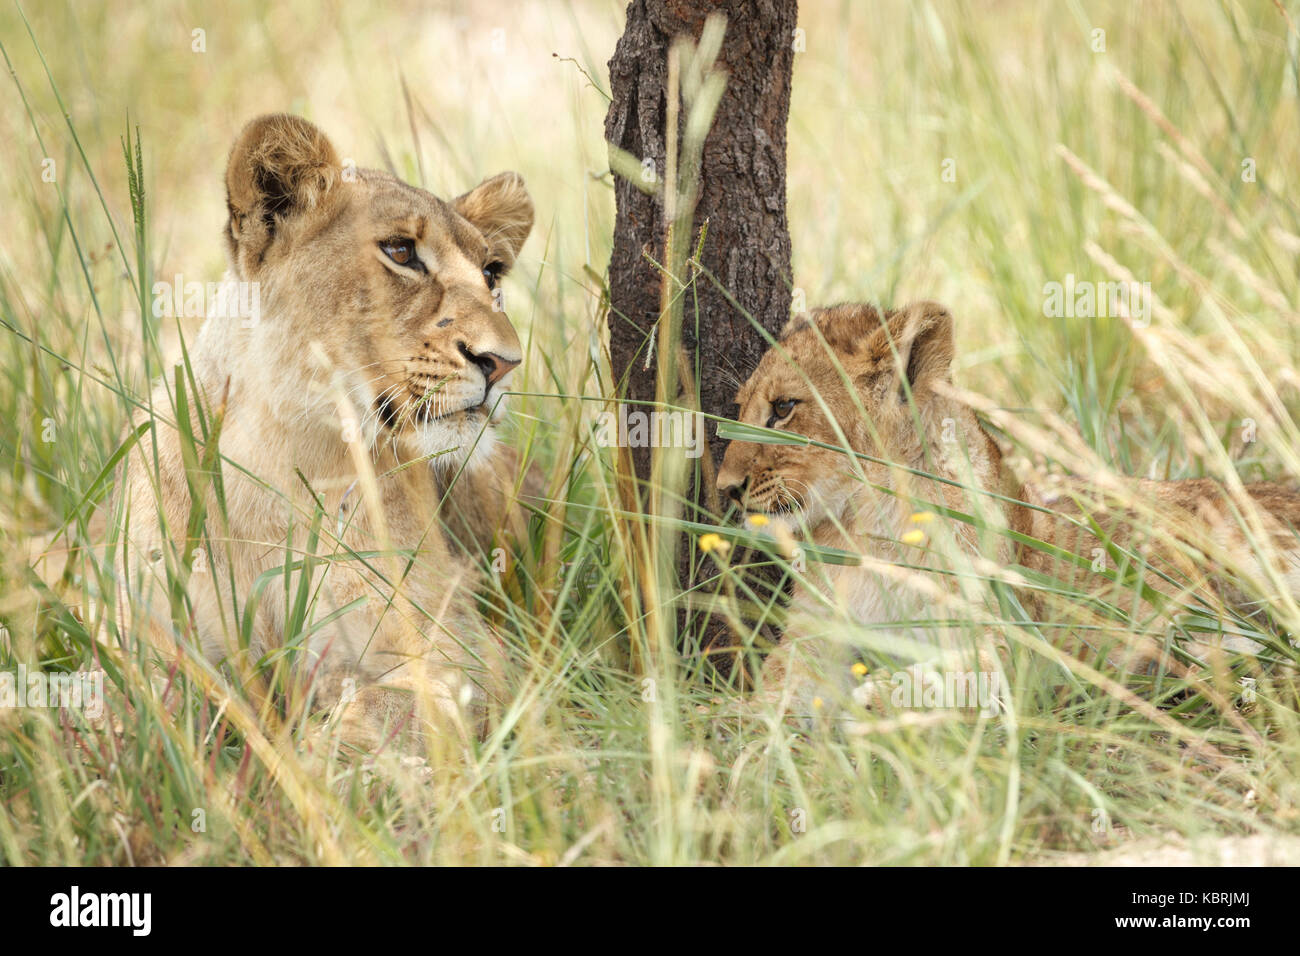 Lions cubs sleeping playing adults Alpha males Stock Photo